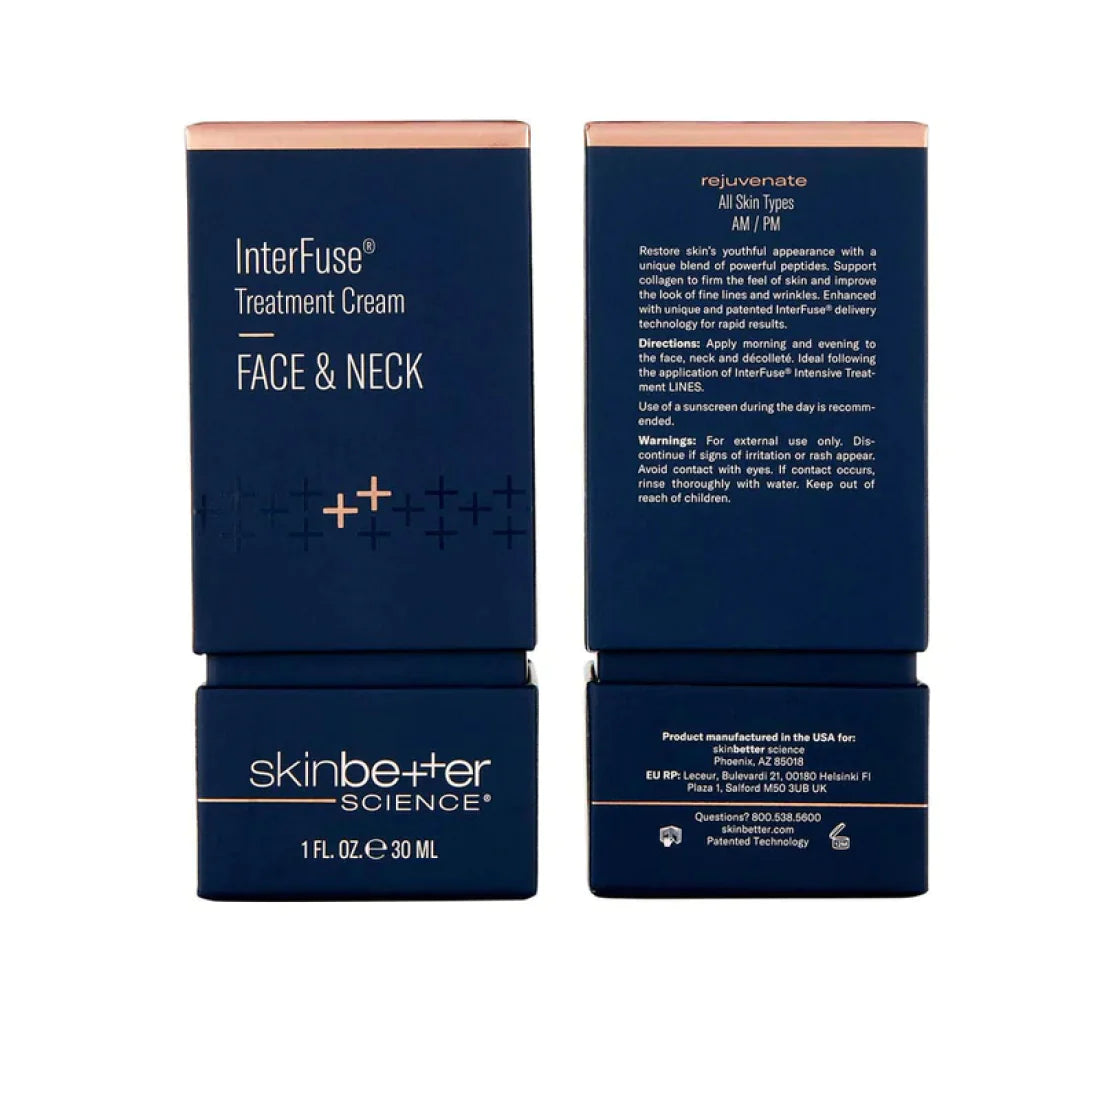 Skinbetter Science InterFuse Treatment Cream FACE & NECK